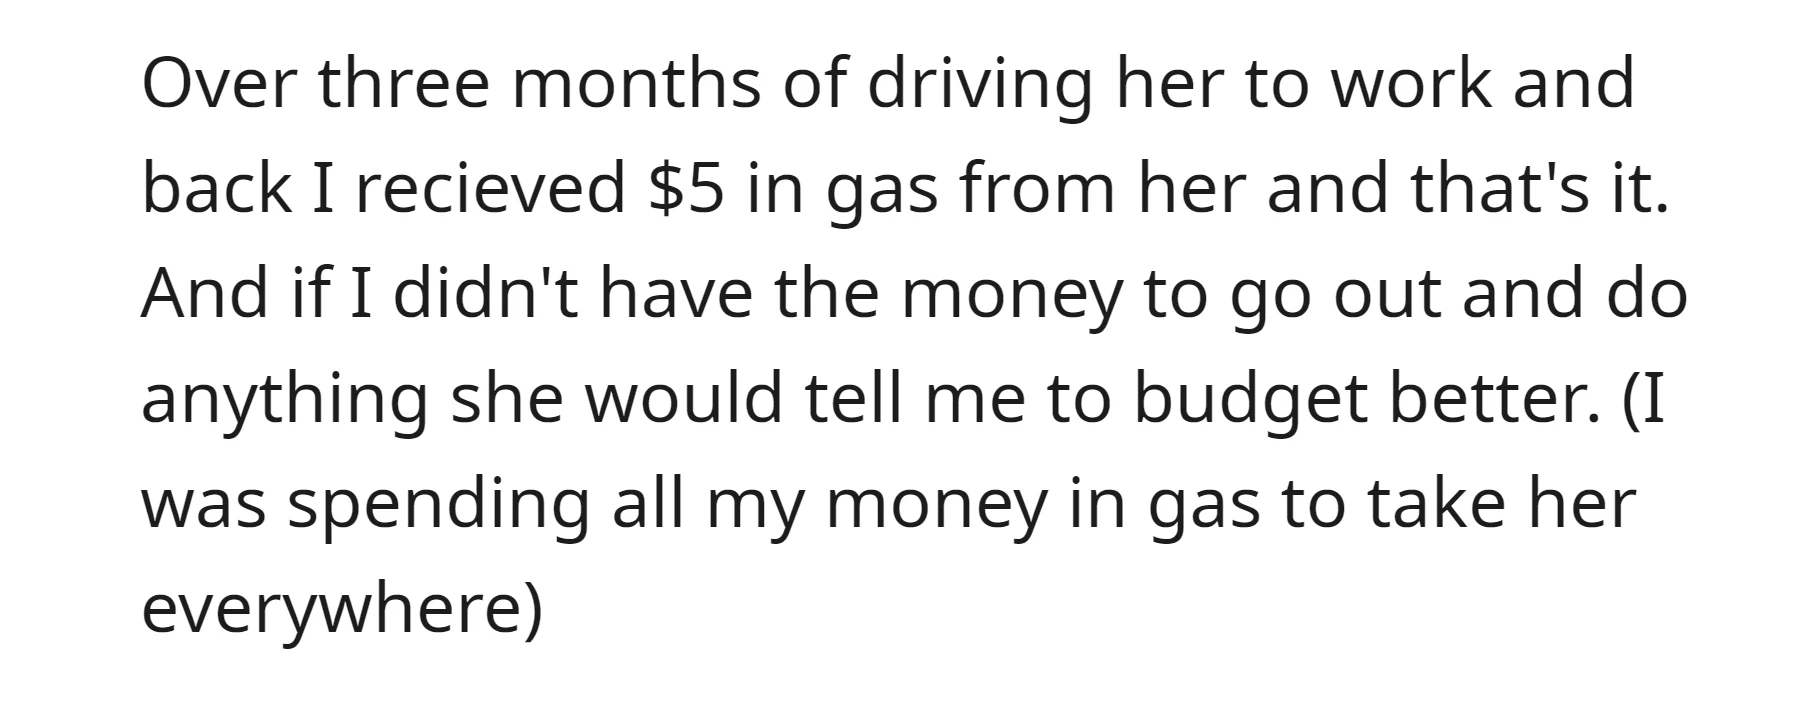 Despite three months of providing transportation for the roommate, the OP received only $5 for gas